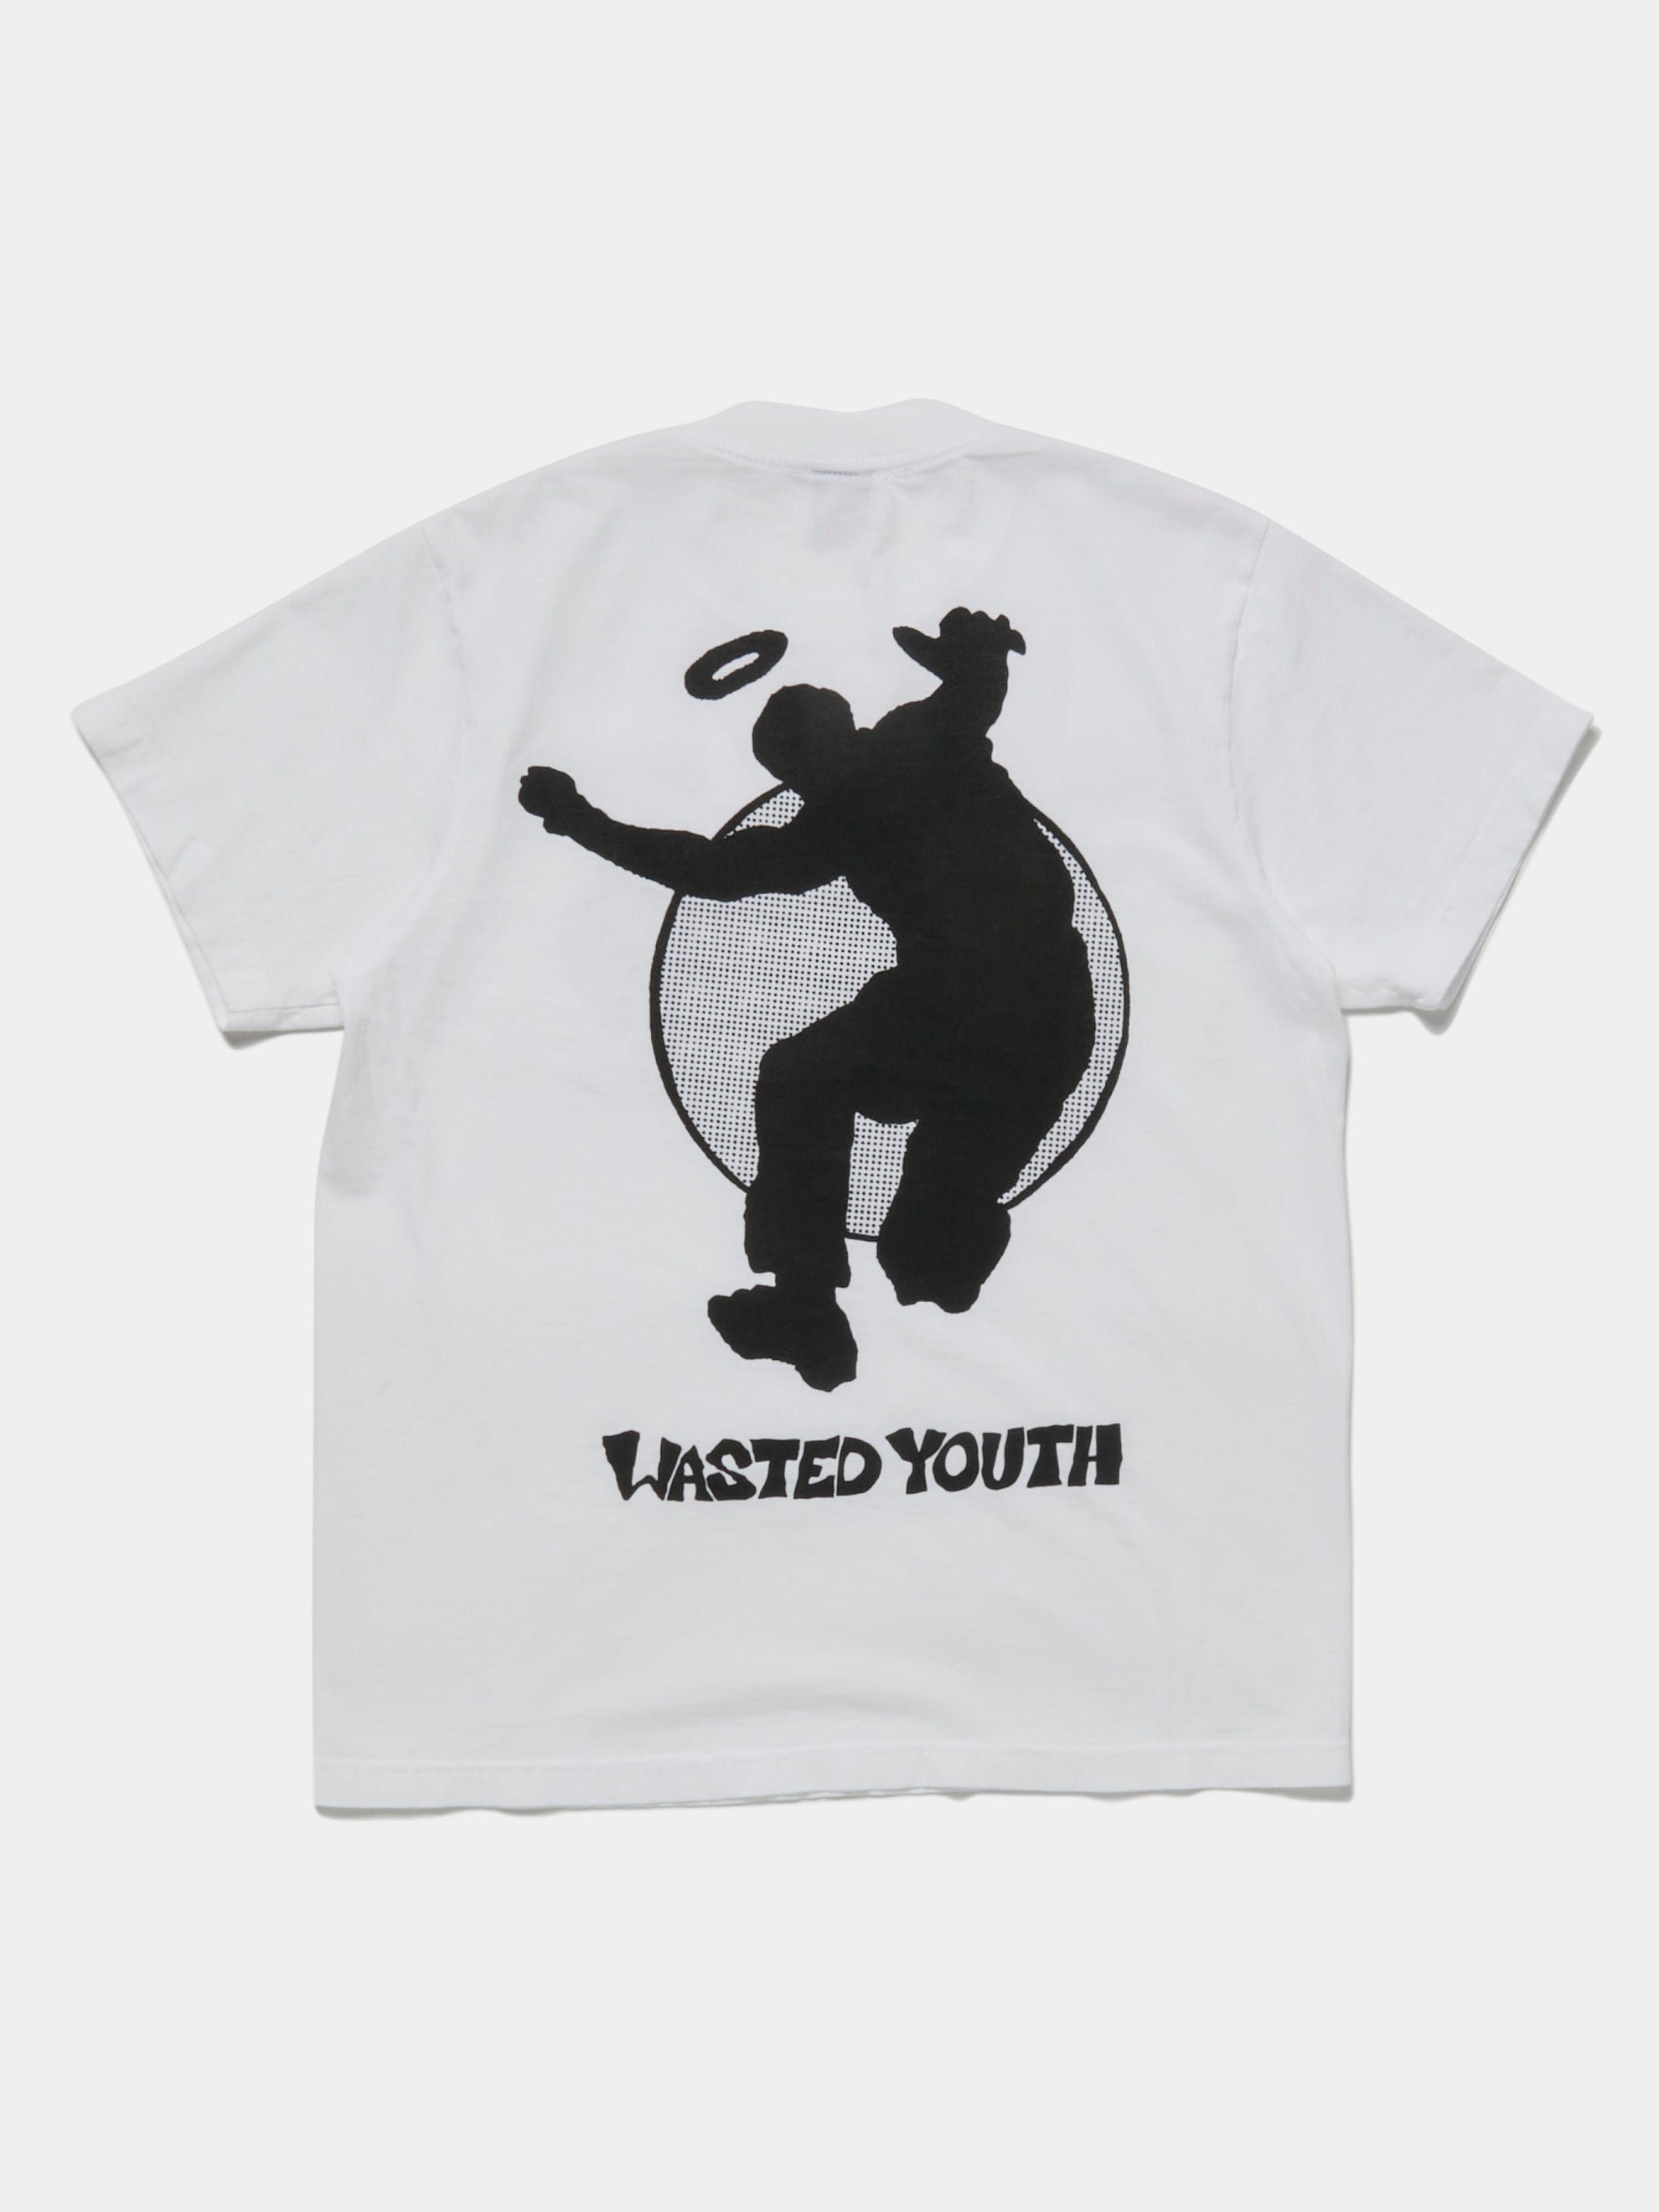 Buy Wasted Youth Wasted Youth x Union Complexcon T-Shirt Online at